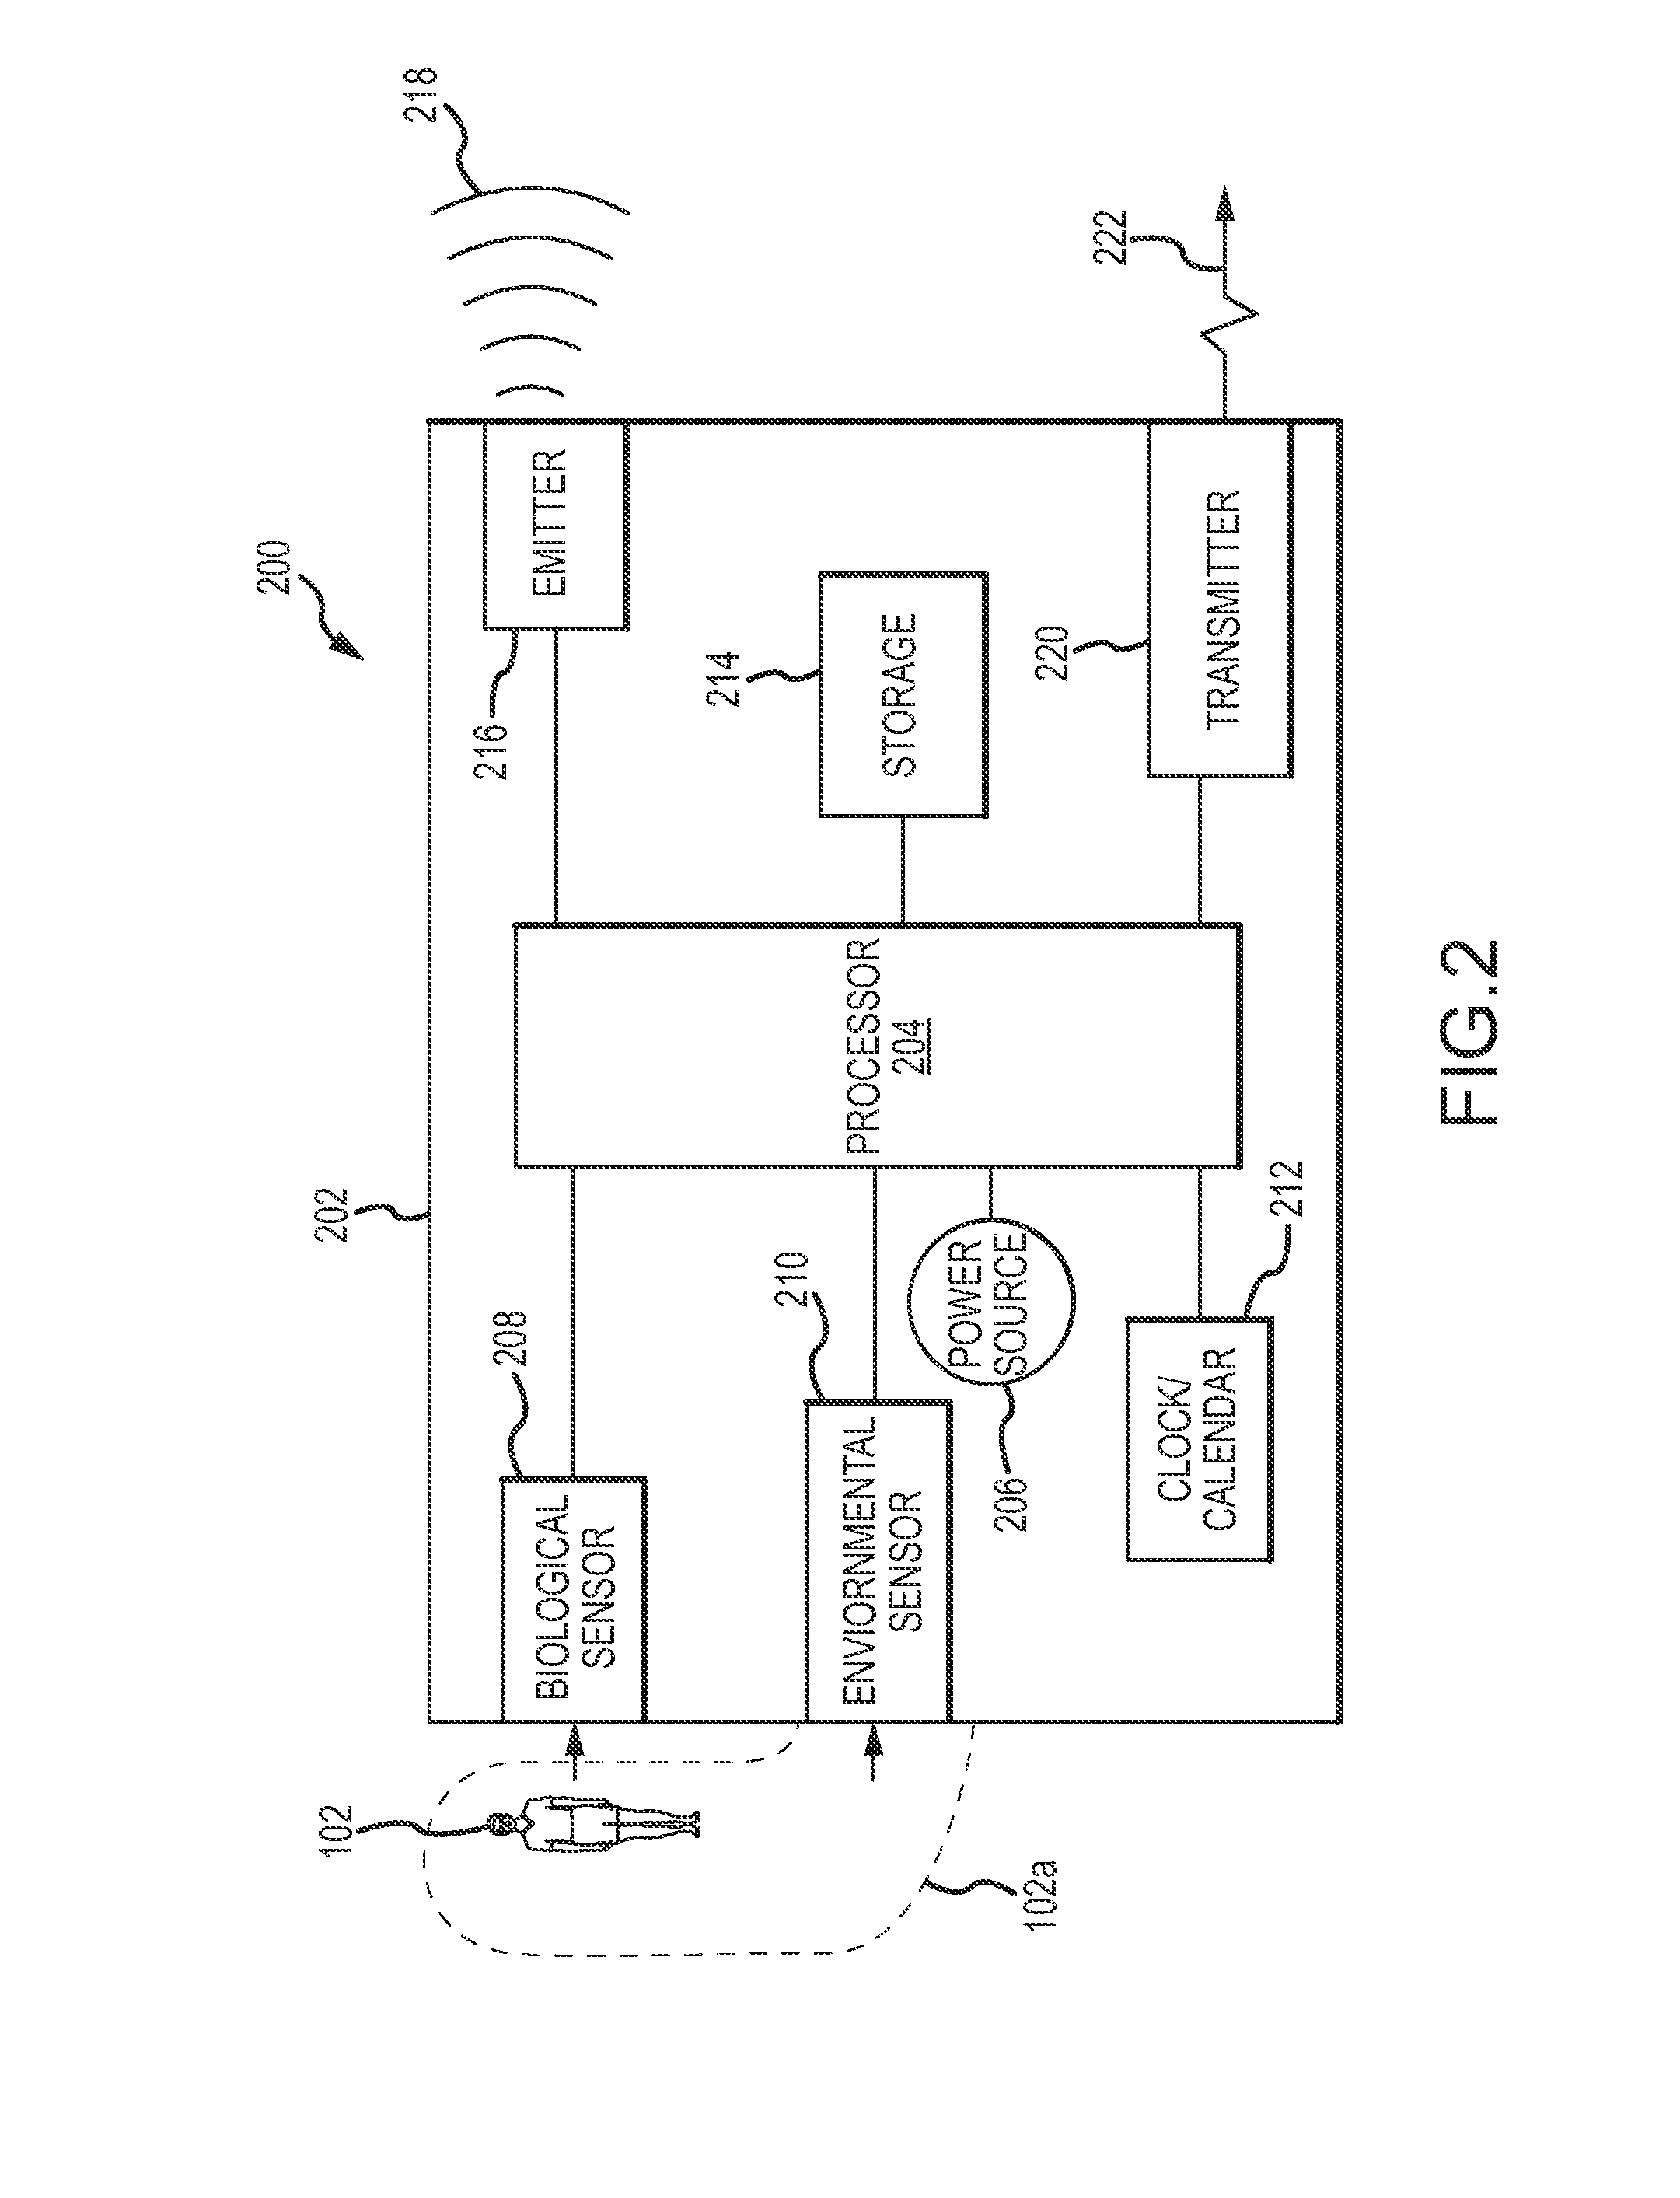 Systems and methods for detection of biological conditions in humans